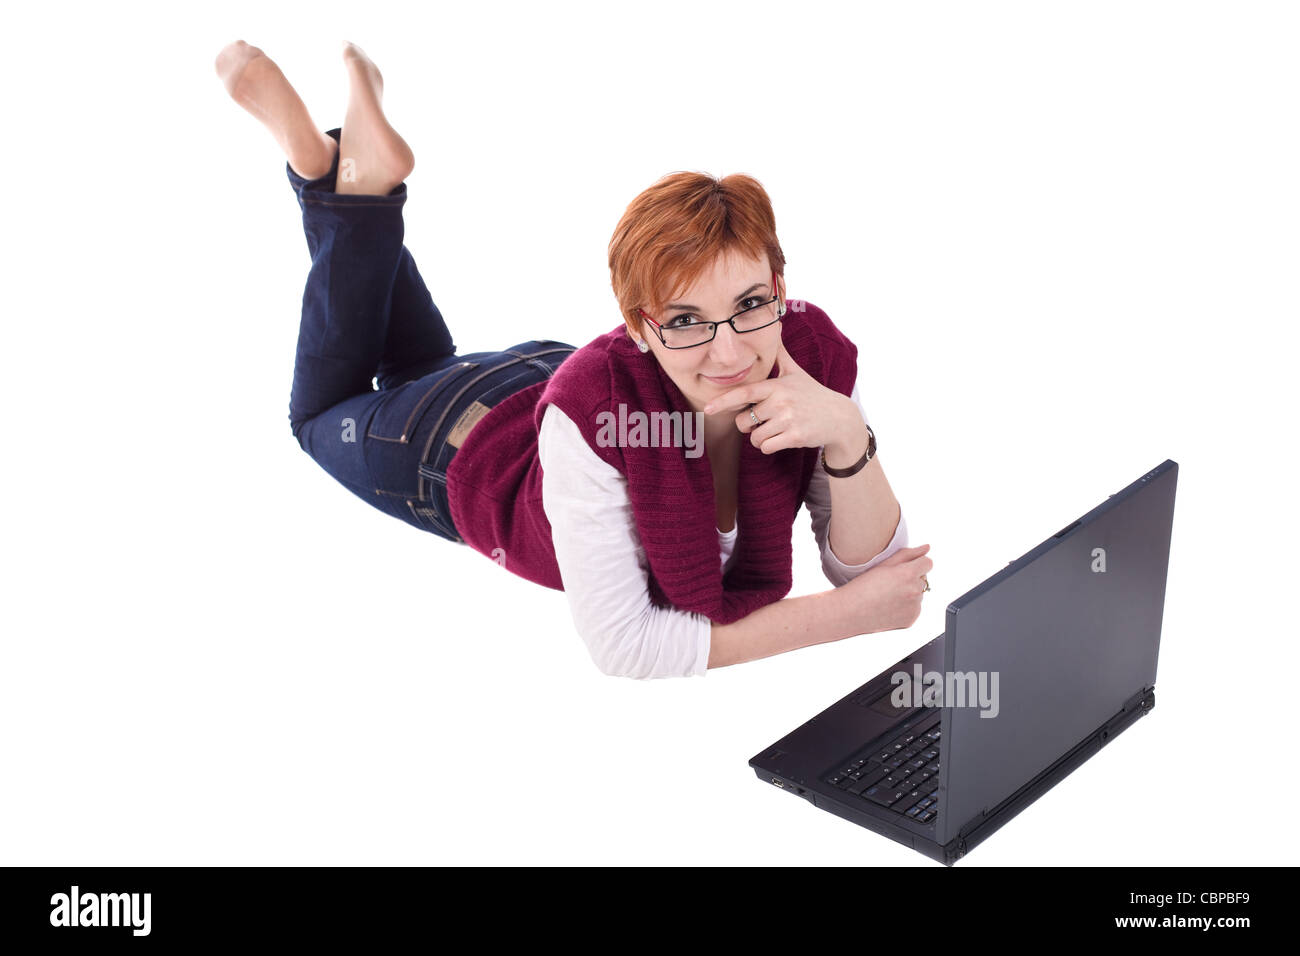 young woman using laptop isolated on white background Stock Photo